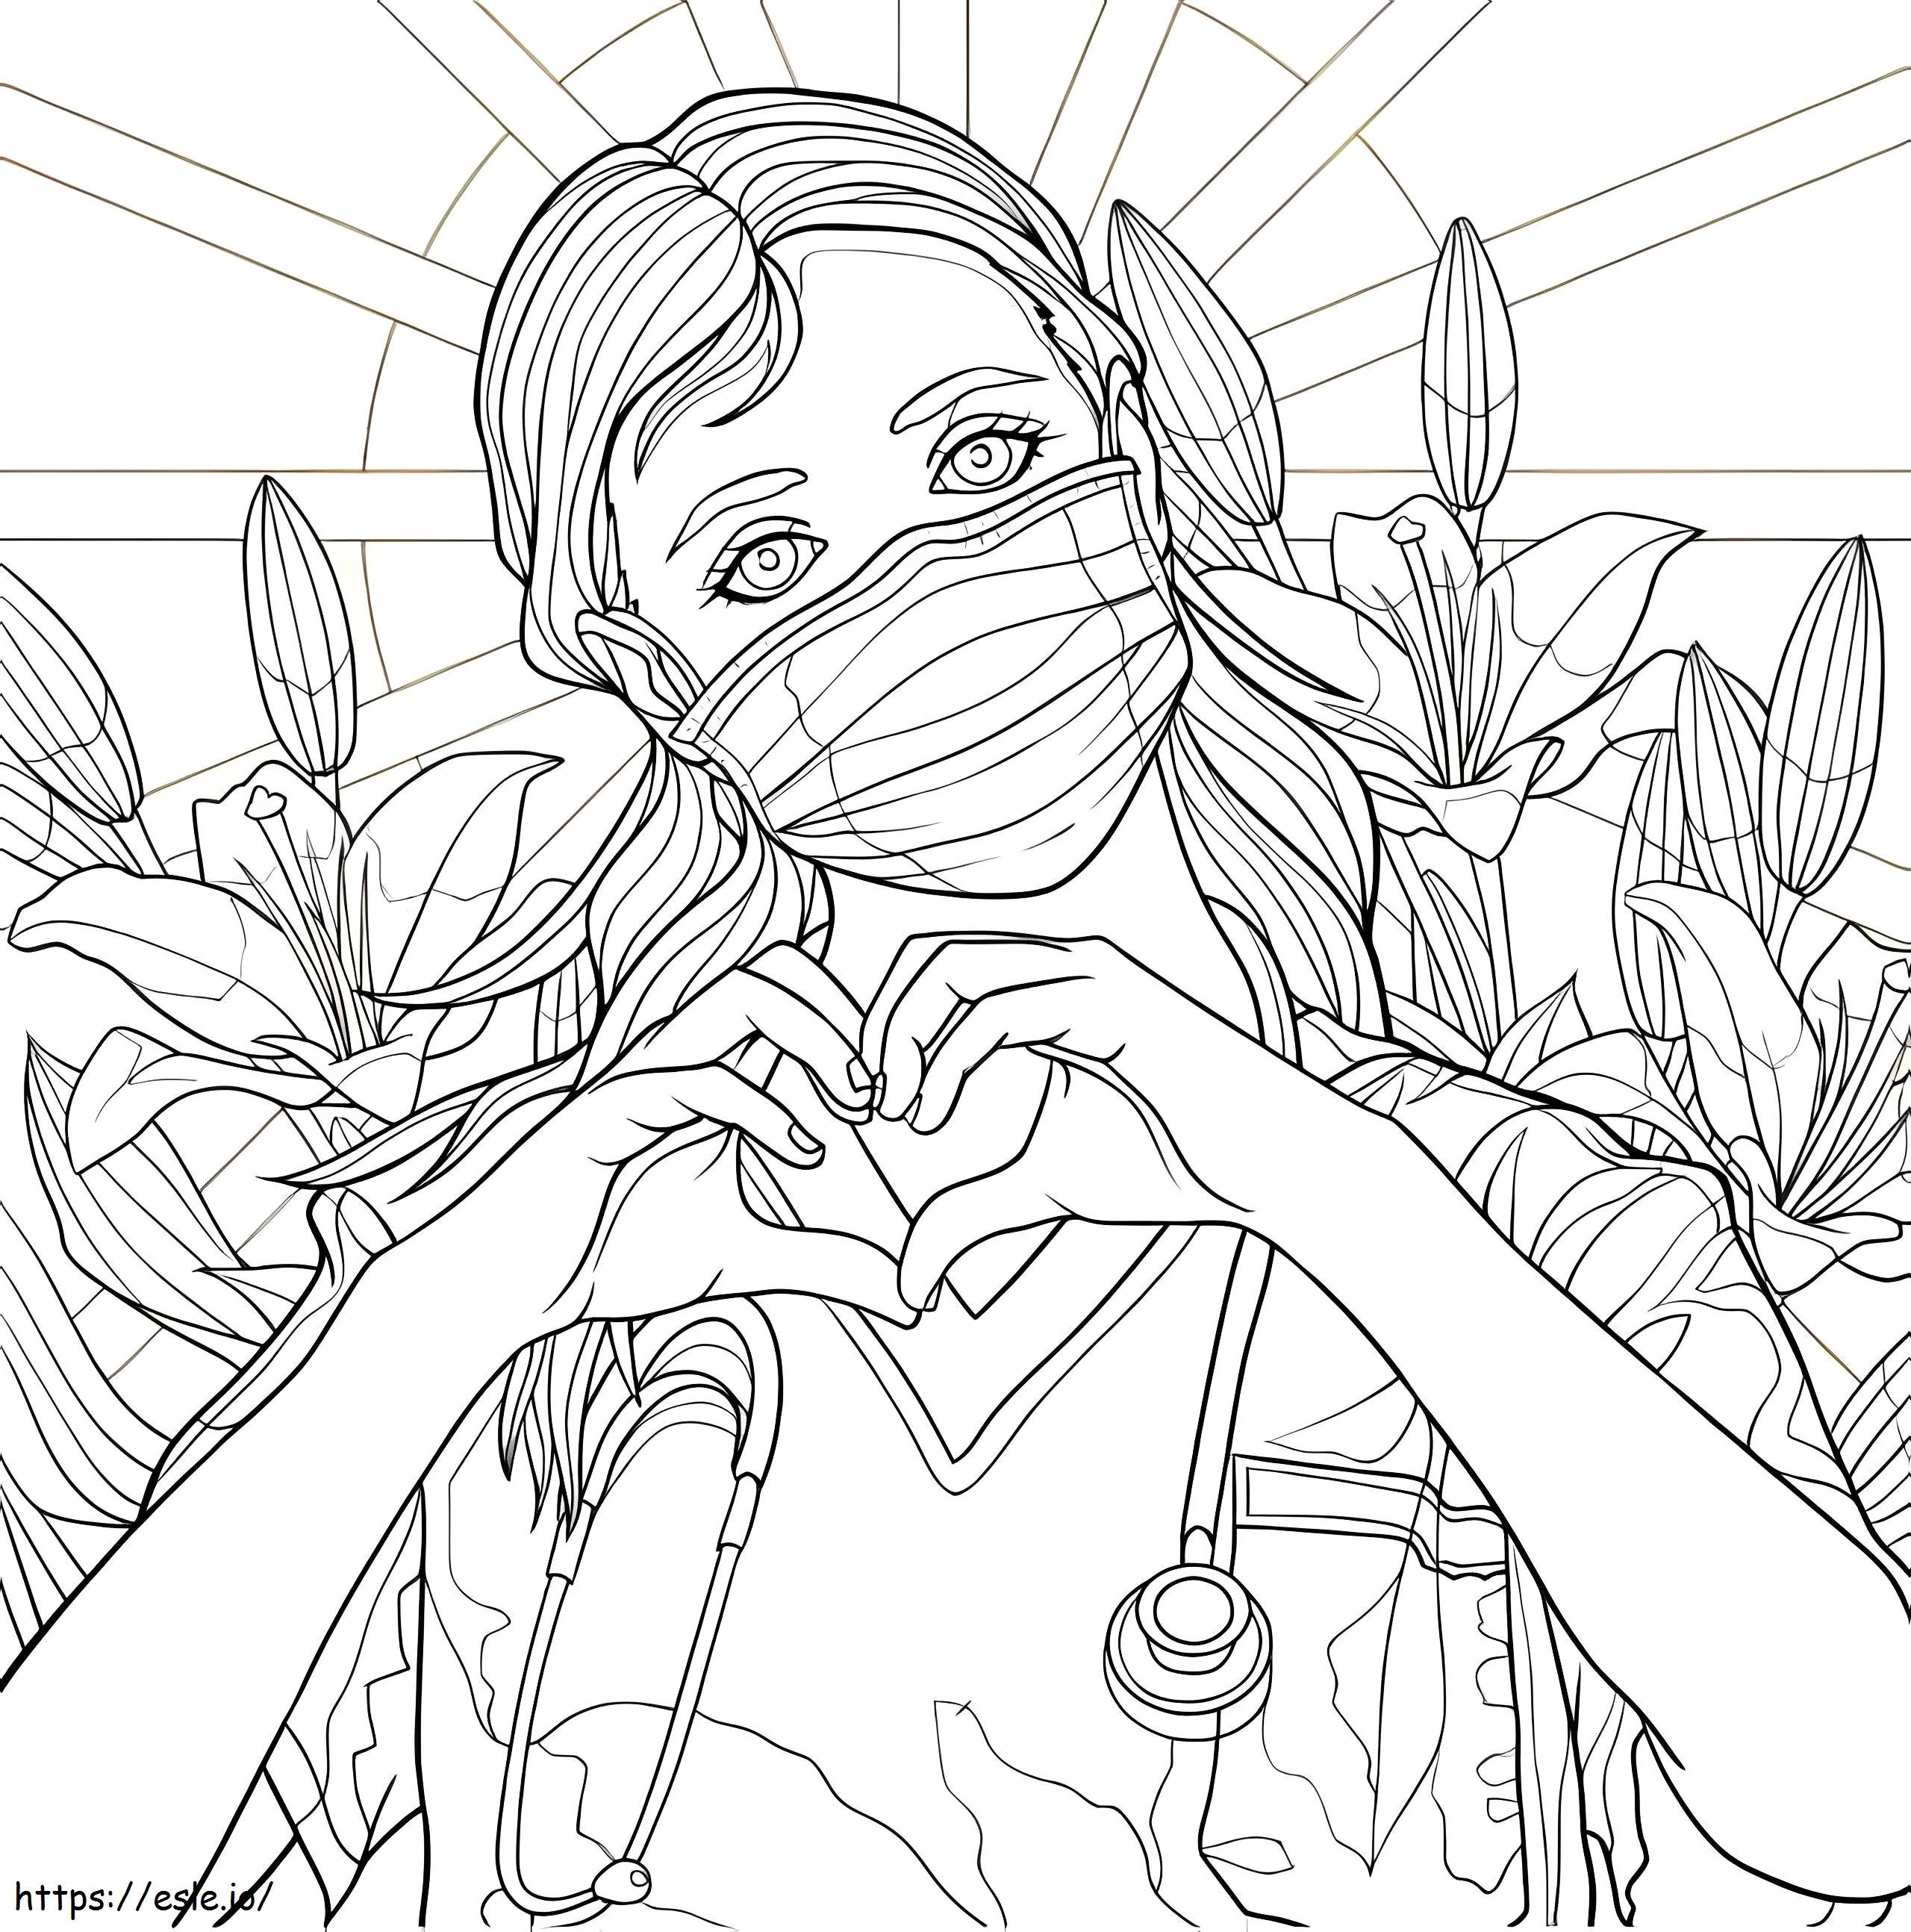 Awesome Nurse coloring page